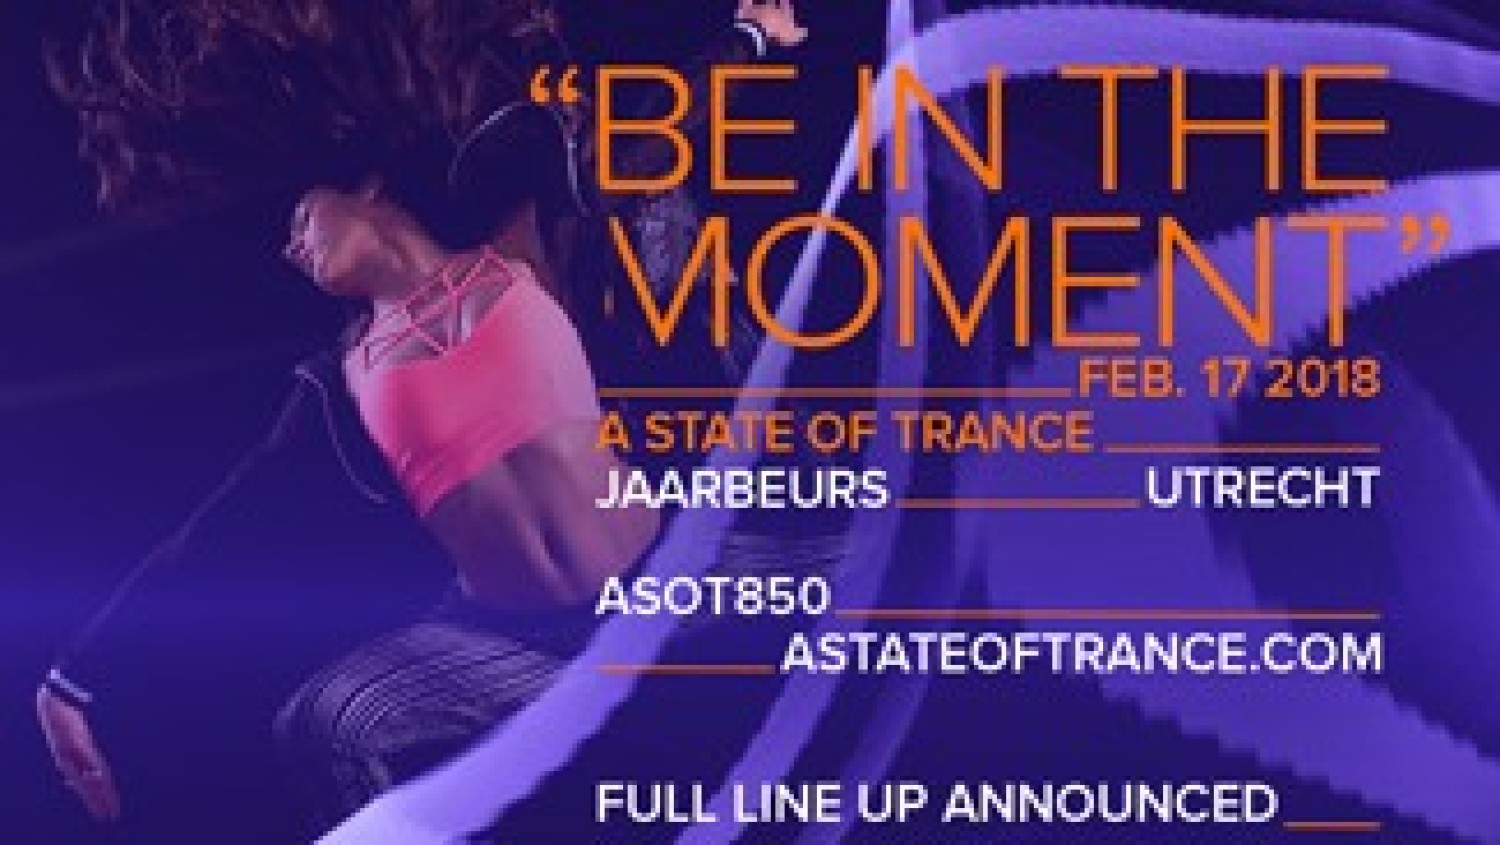 Party report: A State Of Trance Festival, Utrecht (17-02-2018)